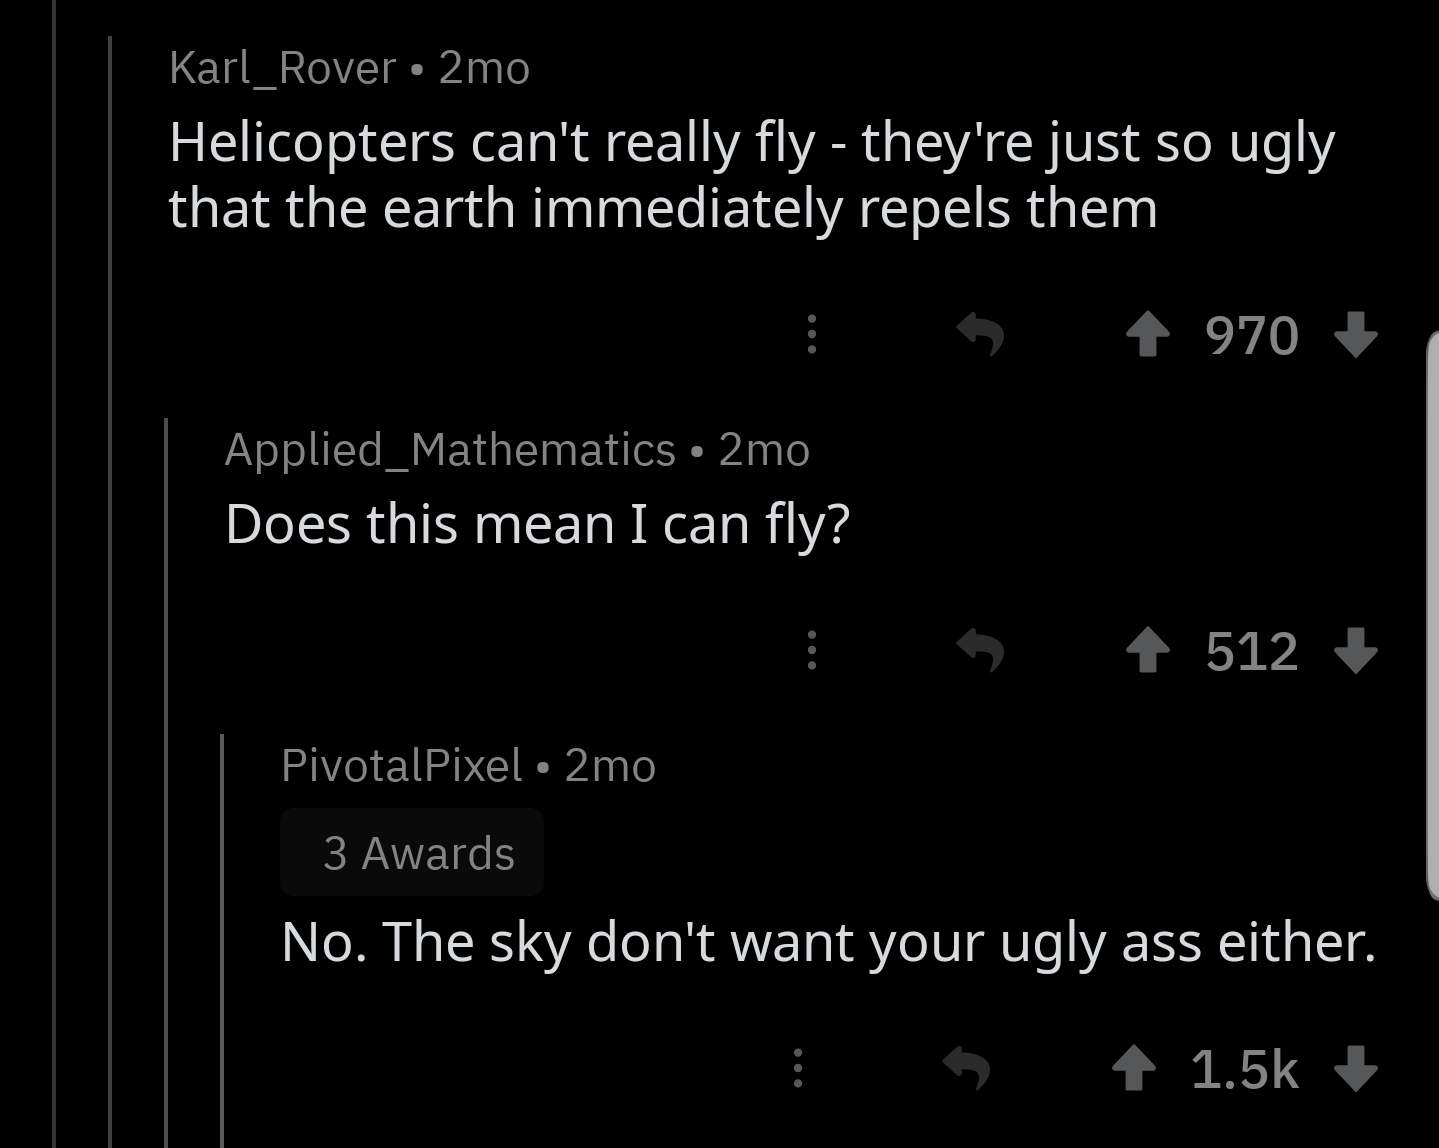 ihadastroke - Karl_Rover 2mo Helicopters can't really fly they're just so ugly that the earth immediately repels them 5 4 970 Applied_Mathematics 2mo Does this mean I can fly? 5 512 PivotalPixel 2mo 3 Awards No. The sky don't want your ugly ass either. 1